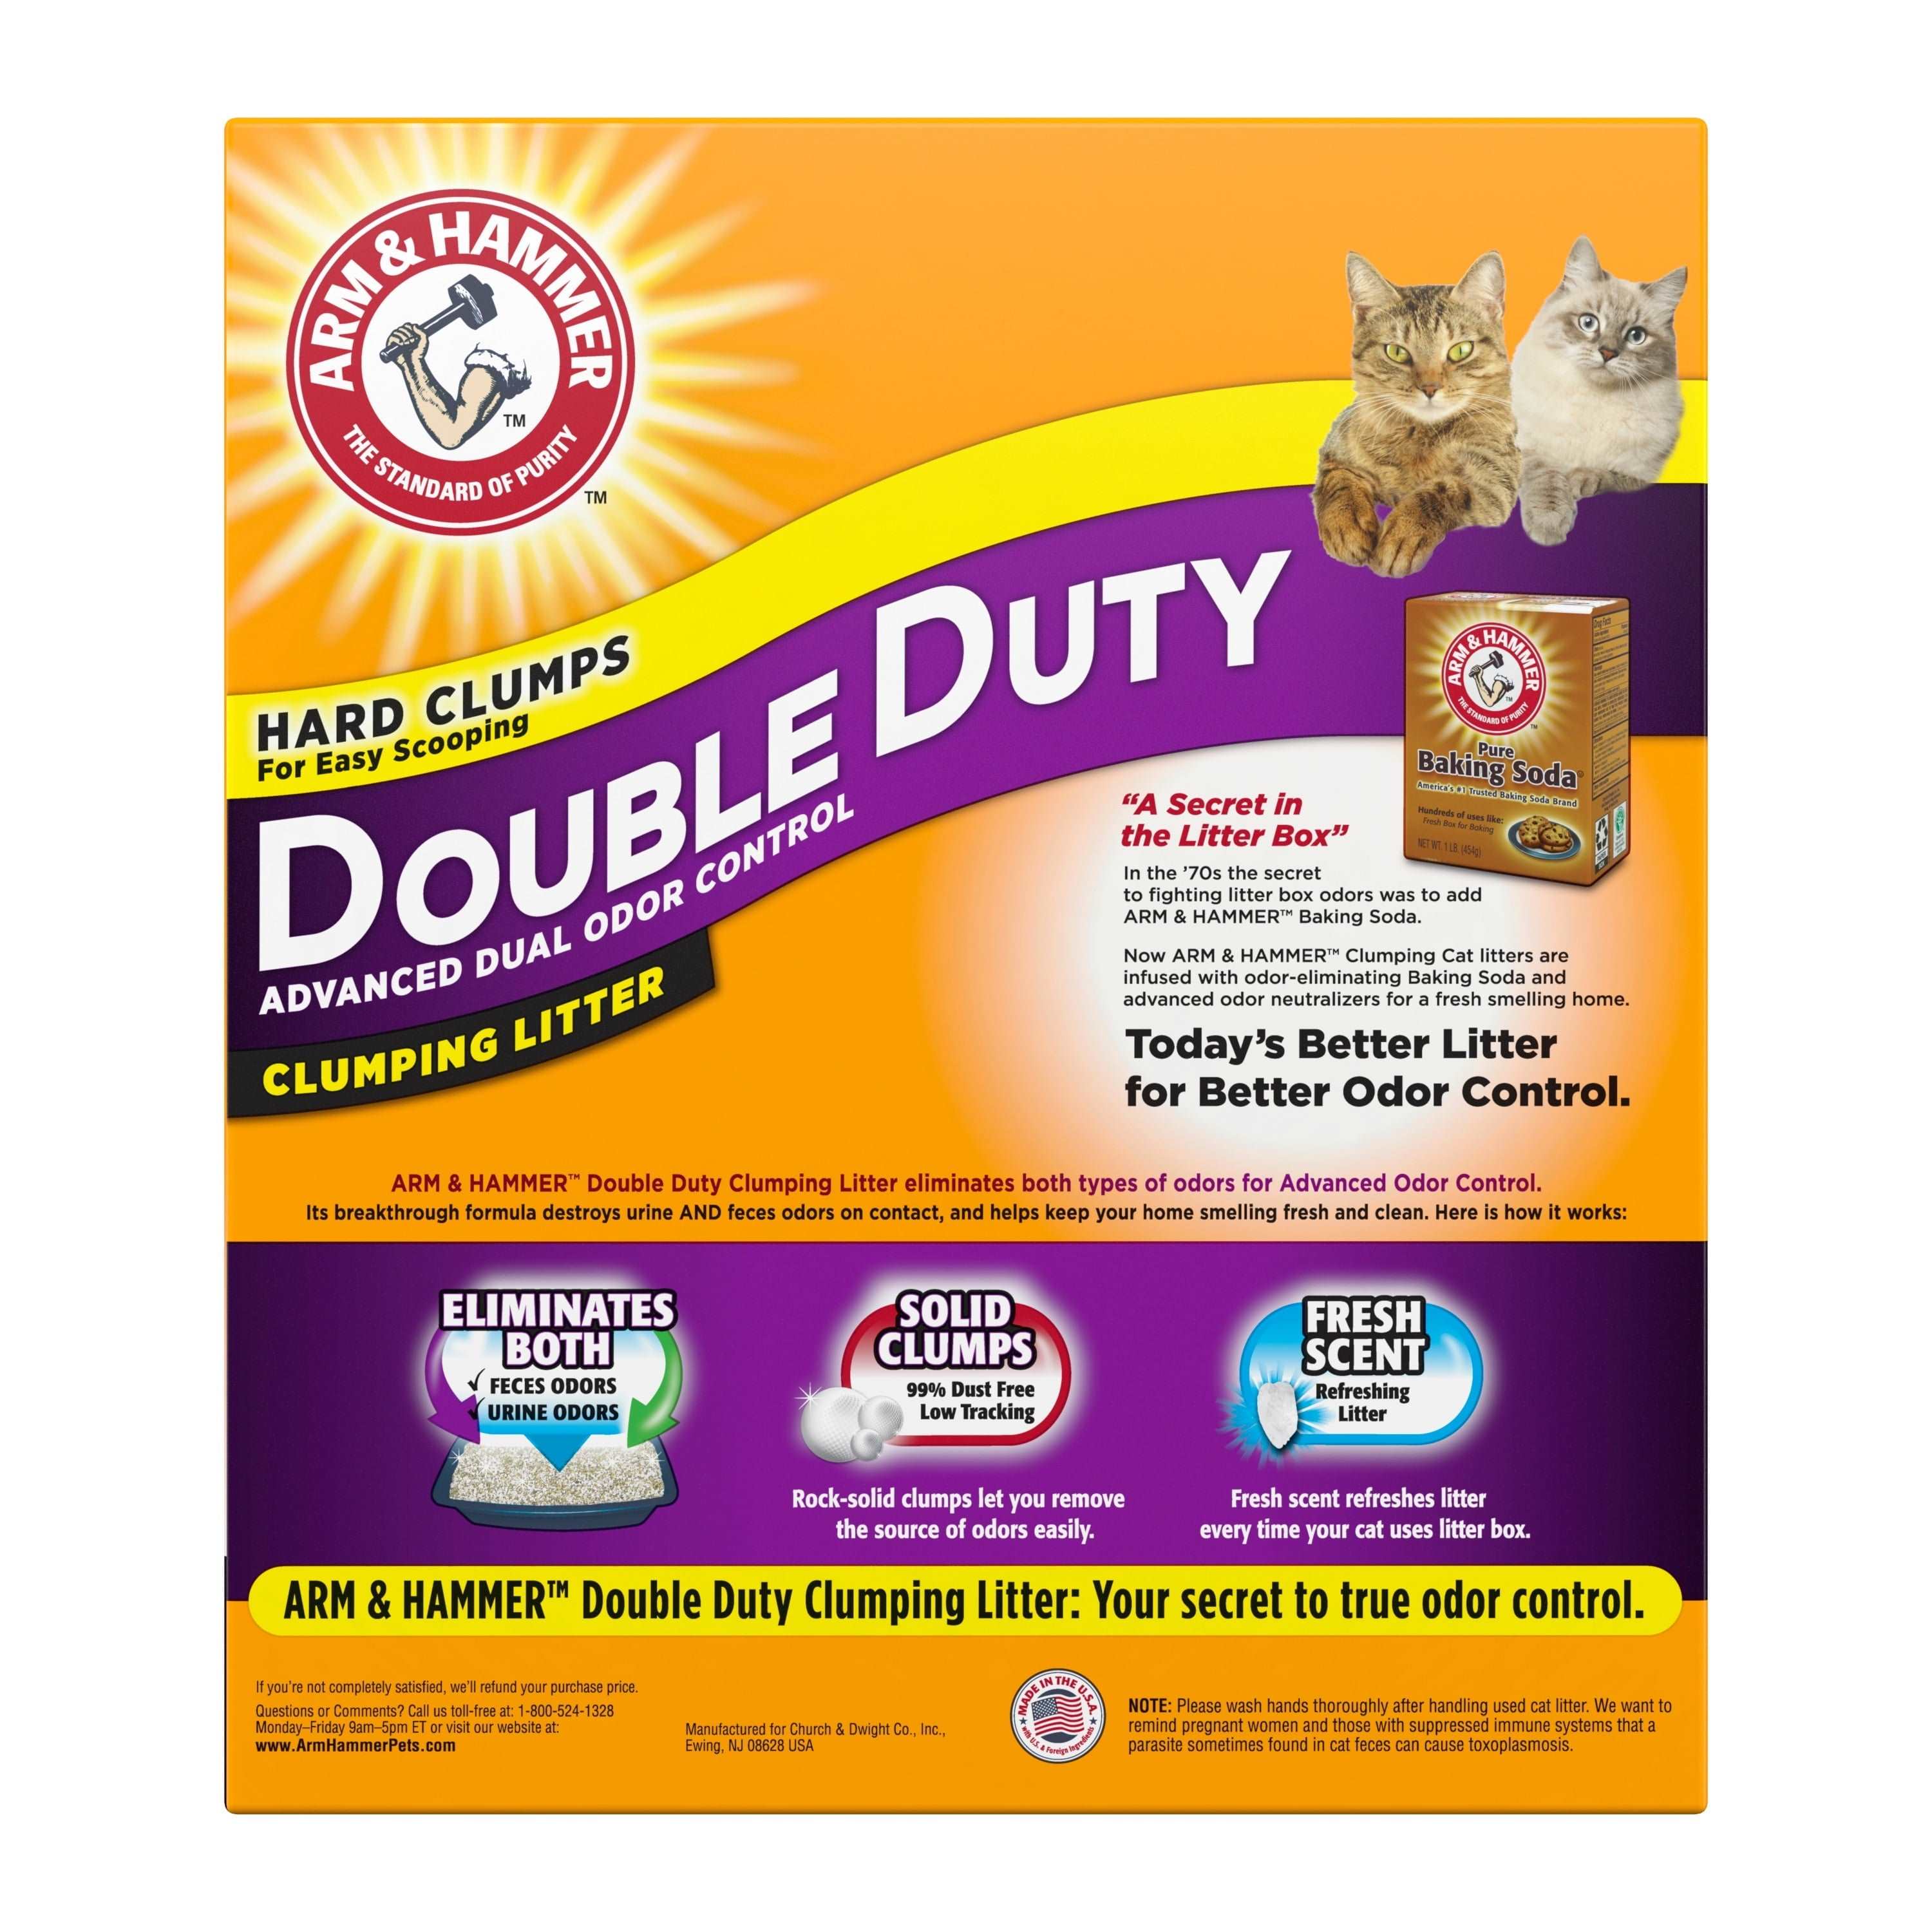 Wholesale prices with free shipping all over United States Arm & Hammer Double Duty Dual Advanced Odor Control Scented Clumping Cat Litter, 40lb - Steven Deals